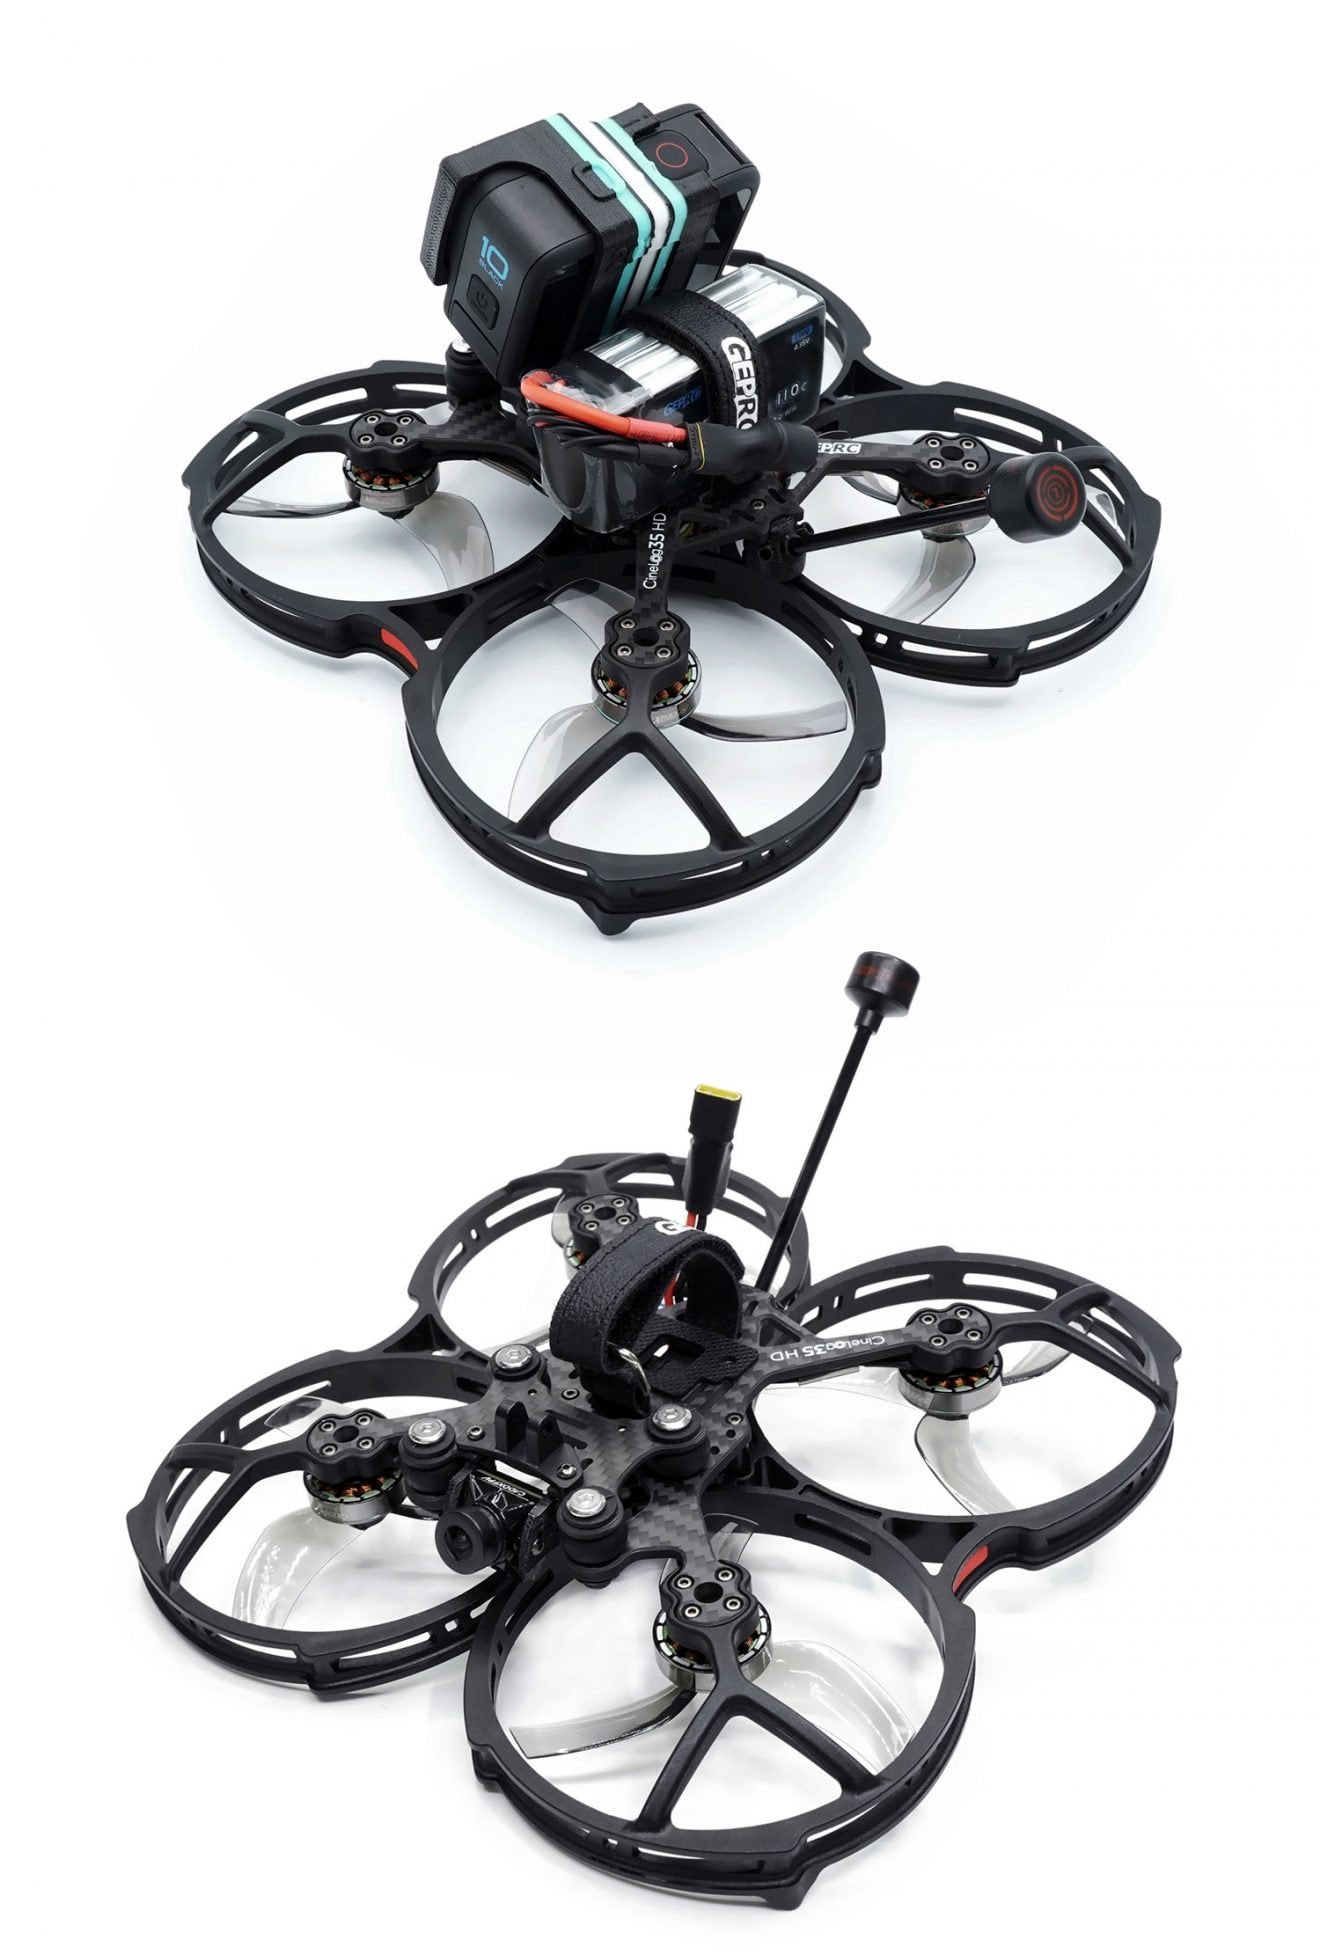 GEPRC CineLog35 FPV Drone, 2004 motor with HQProp DT90MMX3 propeller has stronger power output